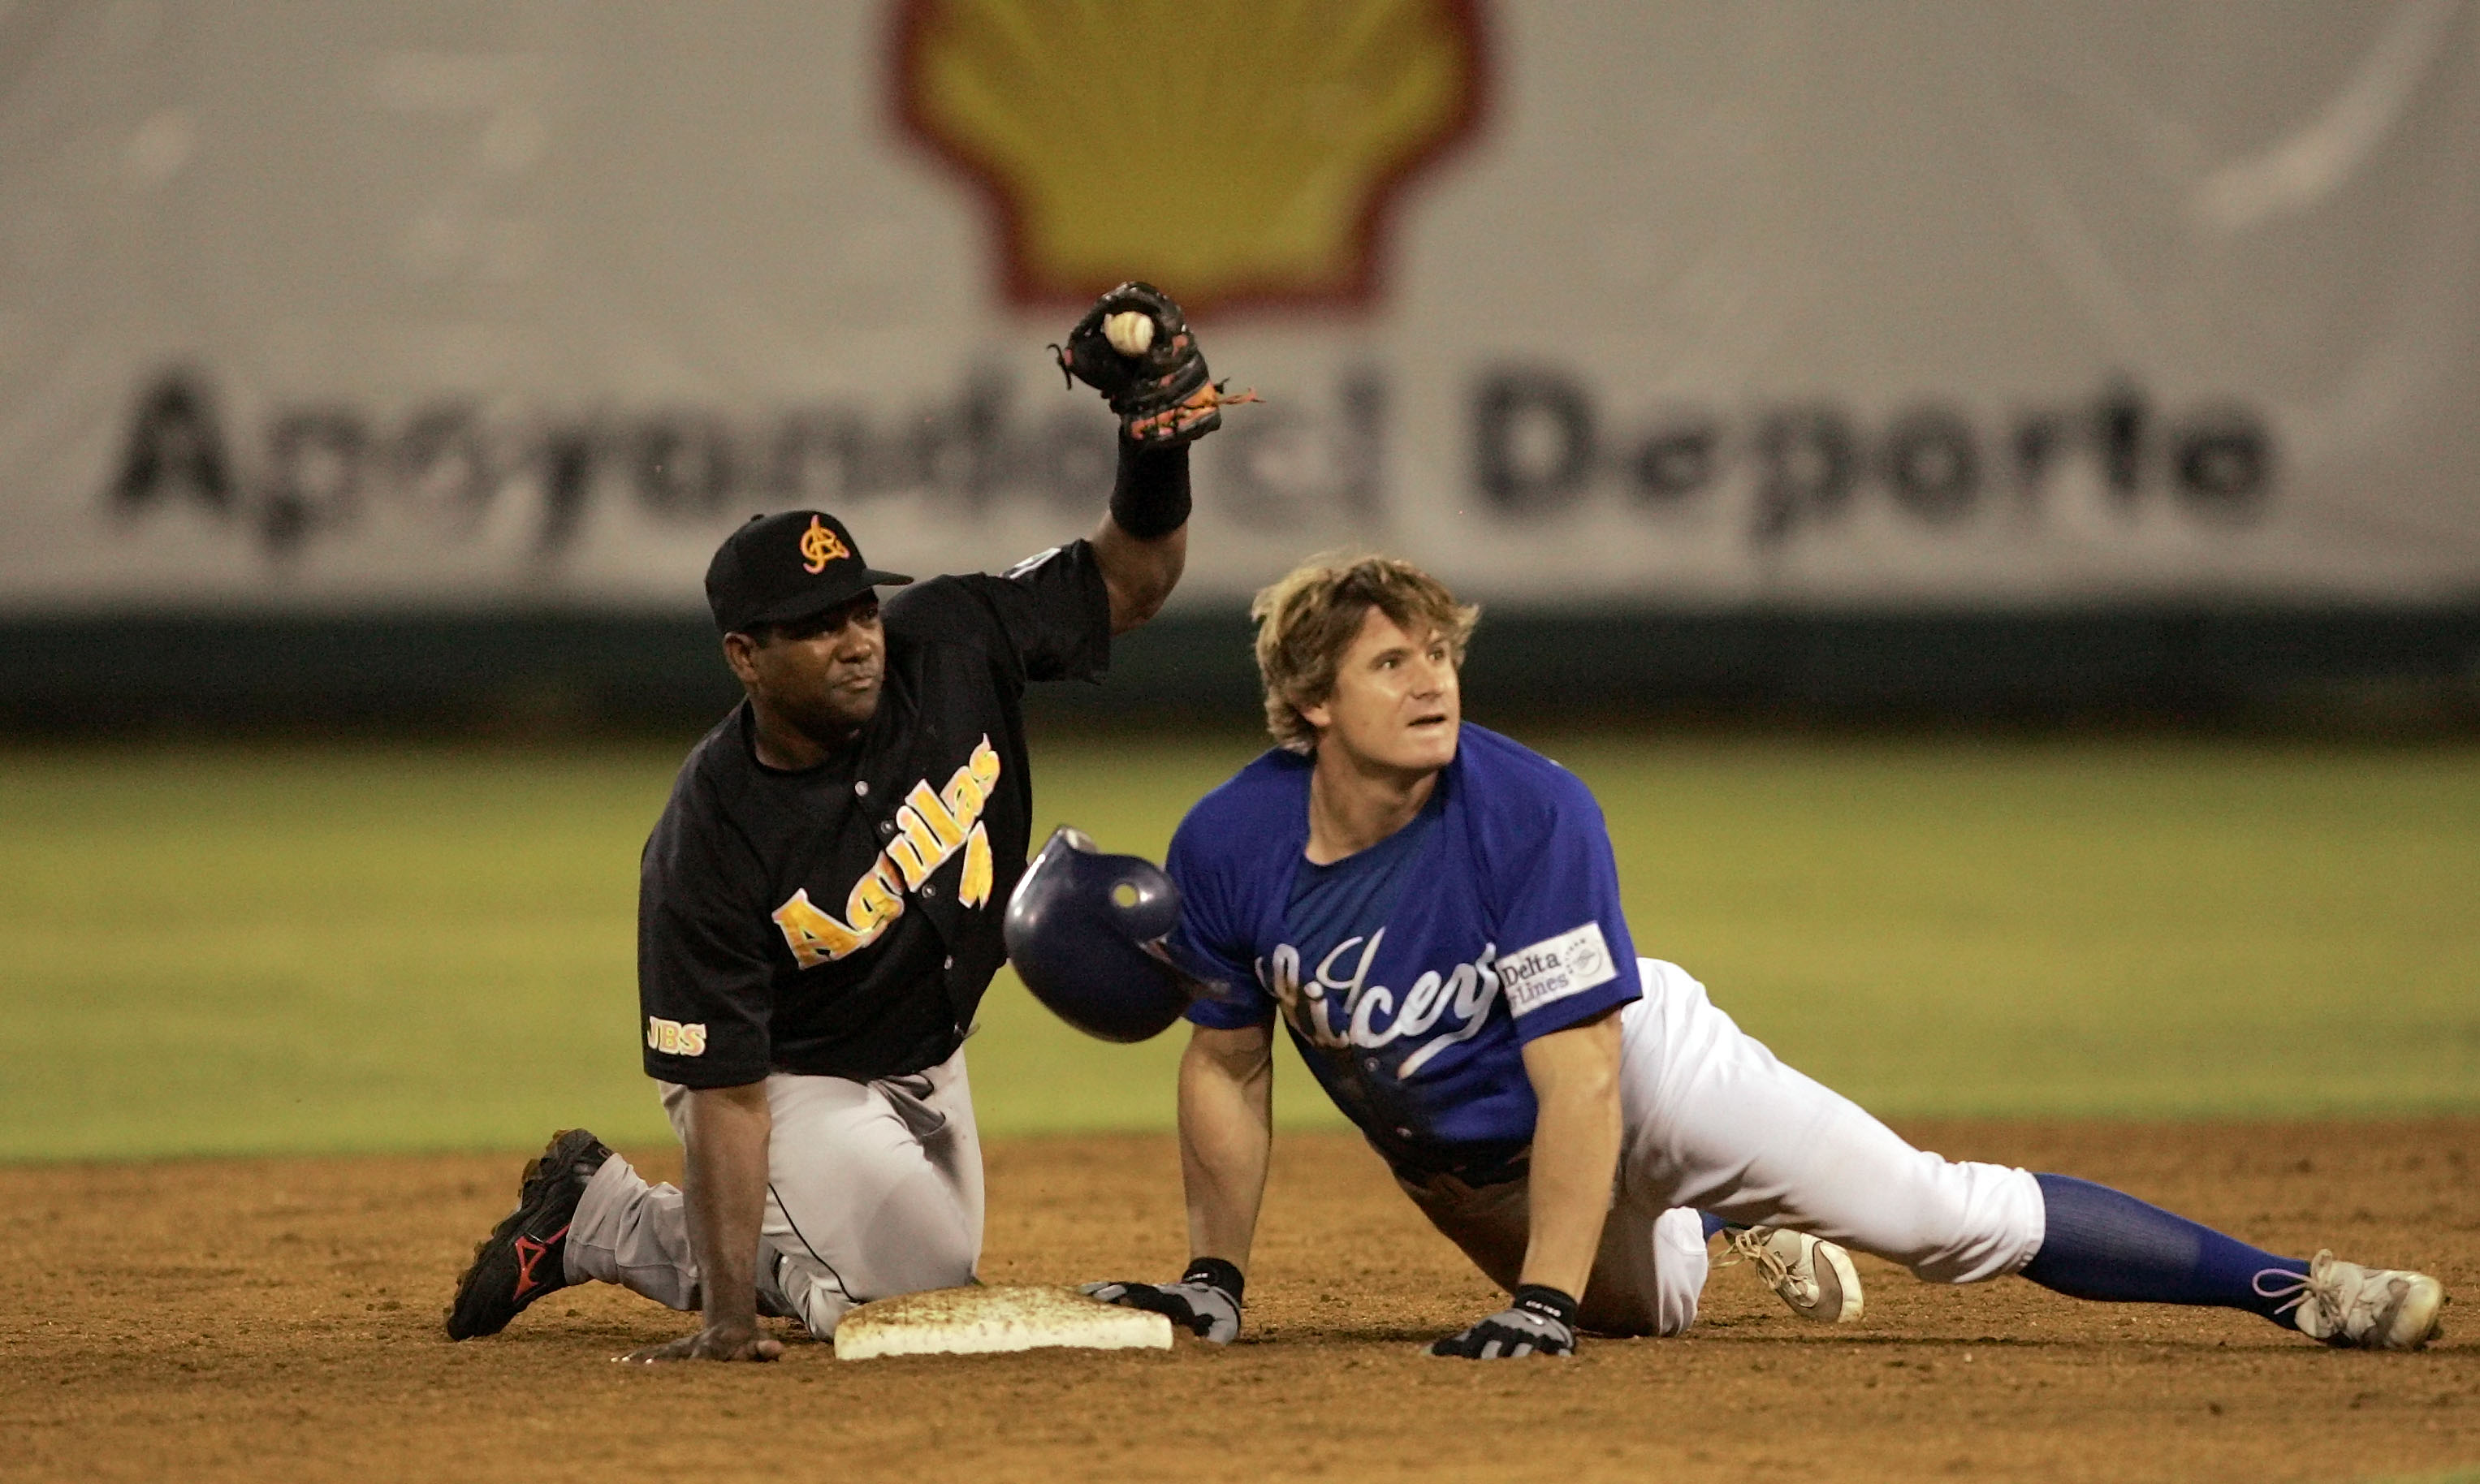 BYRNES_009_CAG.JPG Former teammates, Miguel Tejada, and Eric Byrnes are now part of the biggest rivalry in the winter leagues. The Aguilas and Tigres have been compared to the Yankees and Red Sox of the Dominican Republic. Oakland Athletics’s outfie